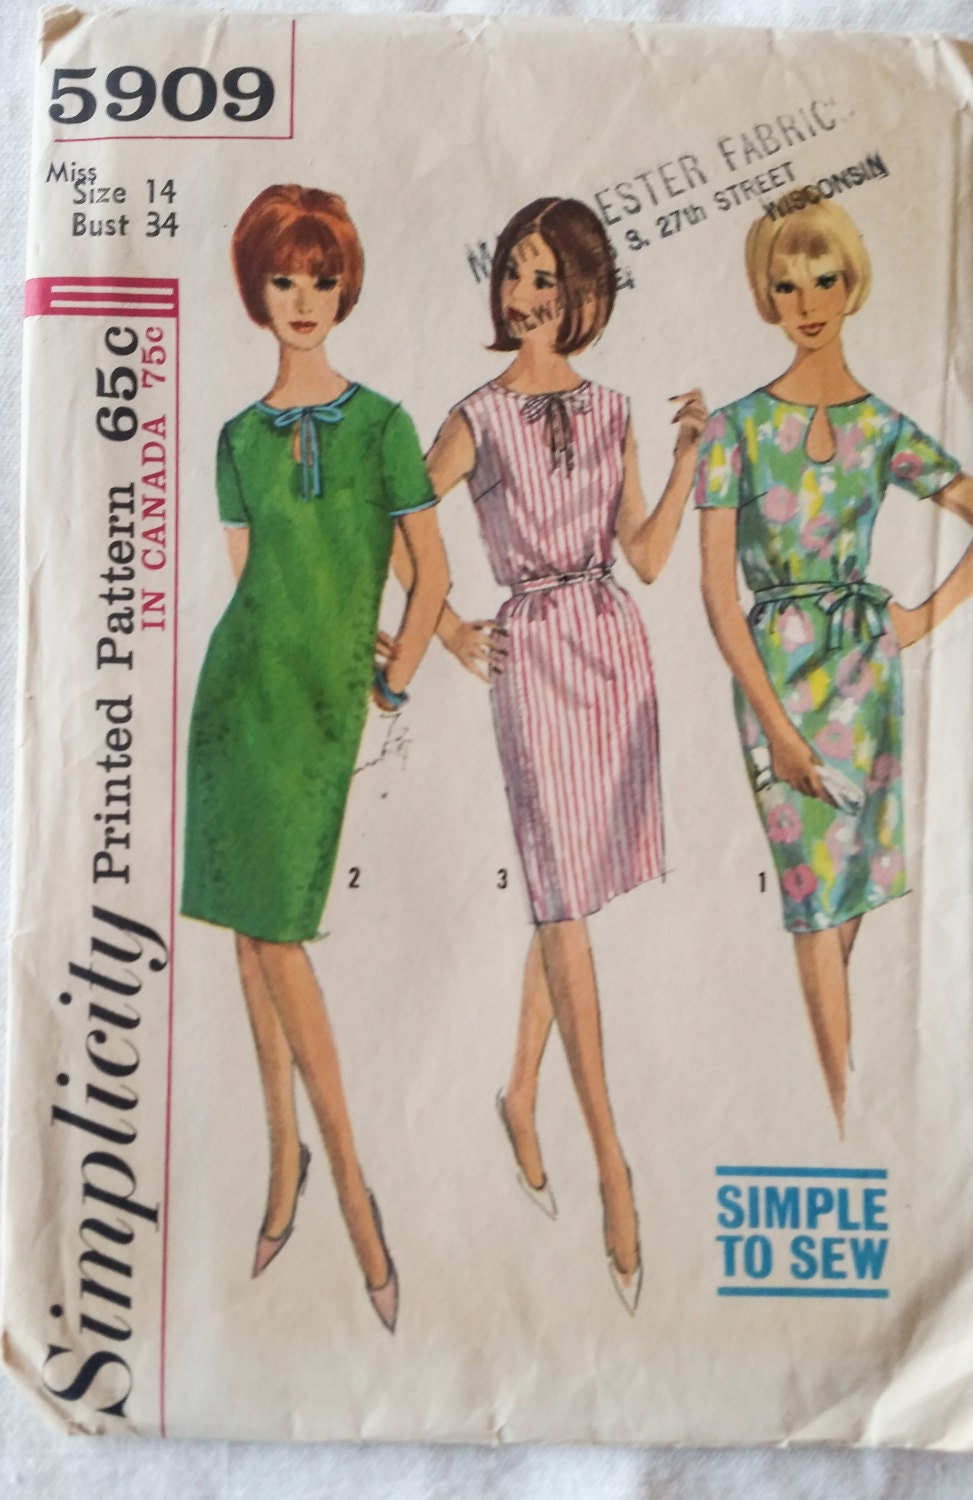 Vintage Simplicity Sewing Dress Pattern 1965 Size 14 Bust